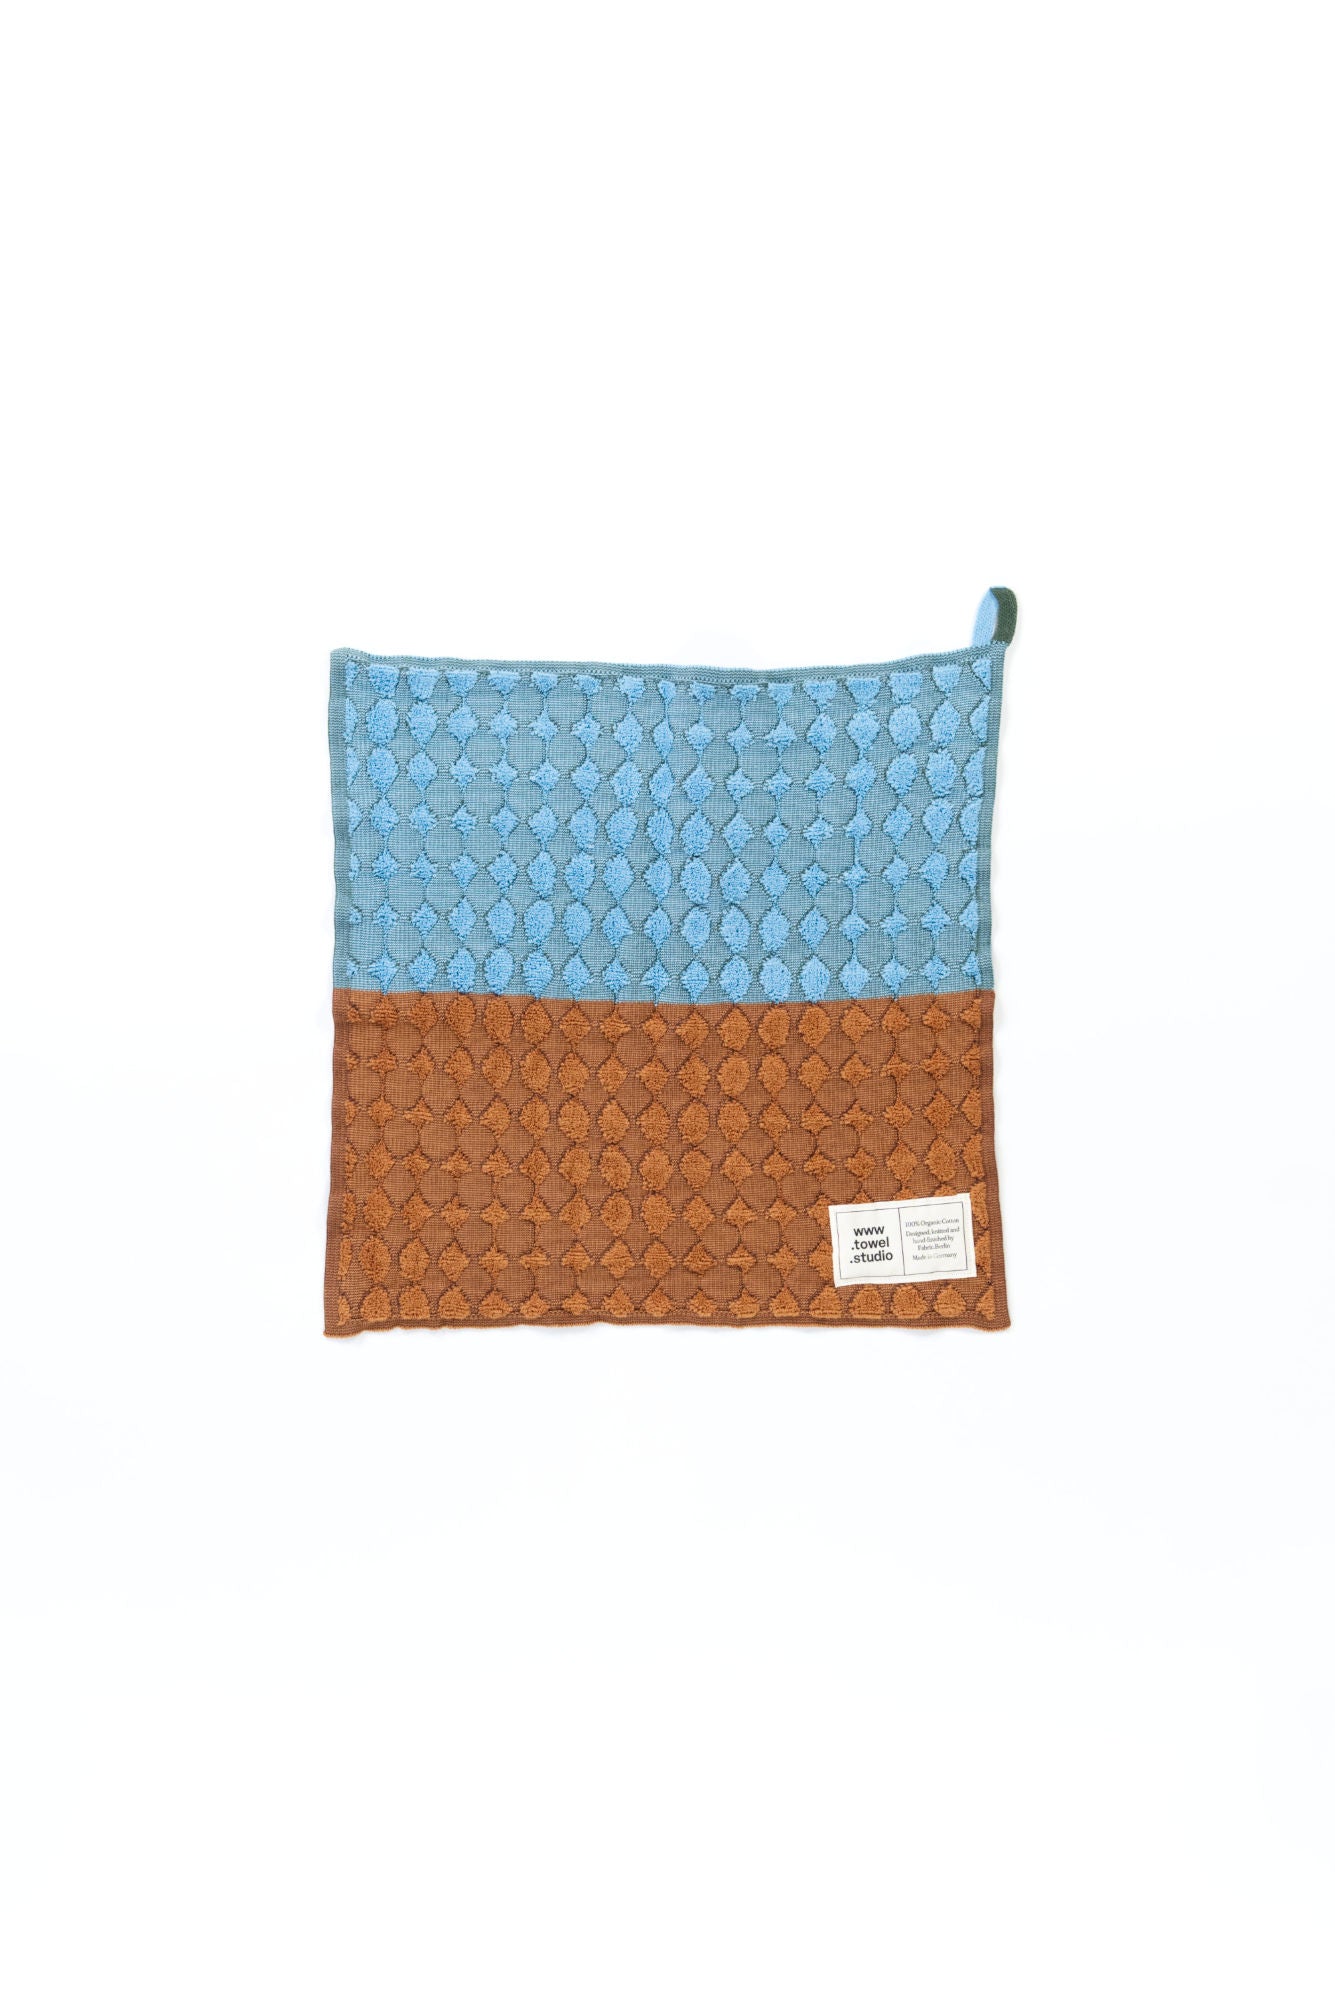 Pond Towel in Cocoa Teal